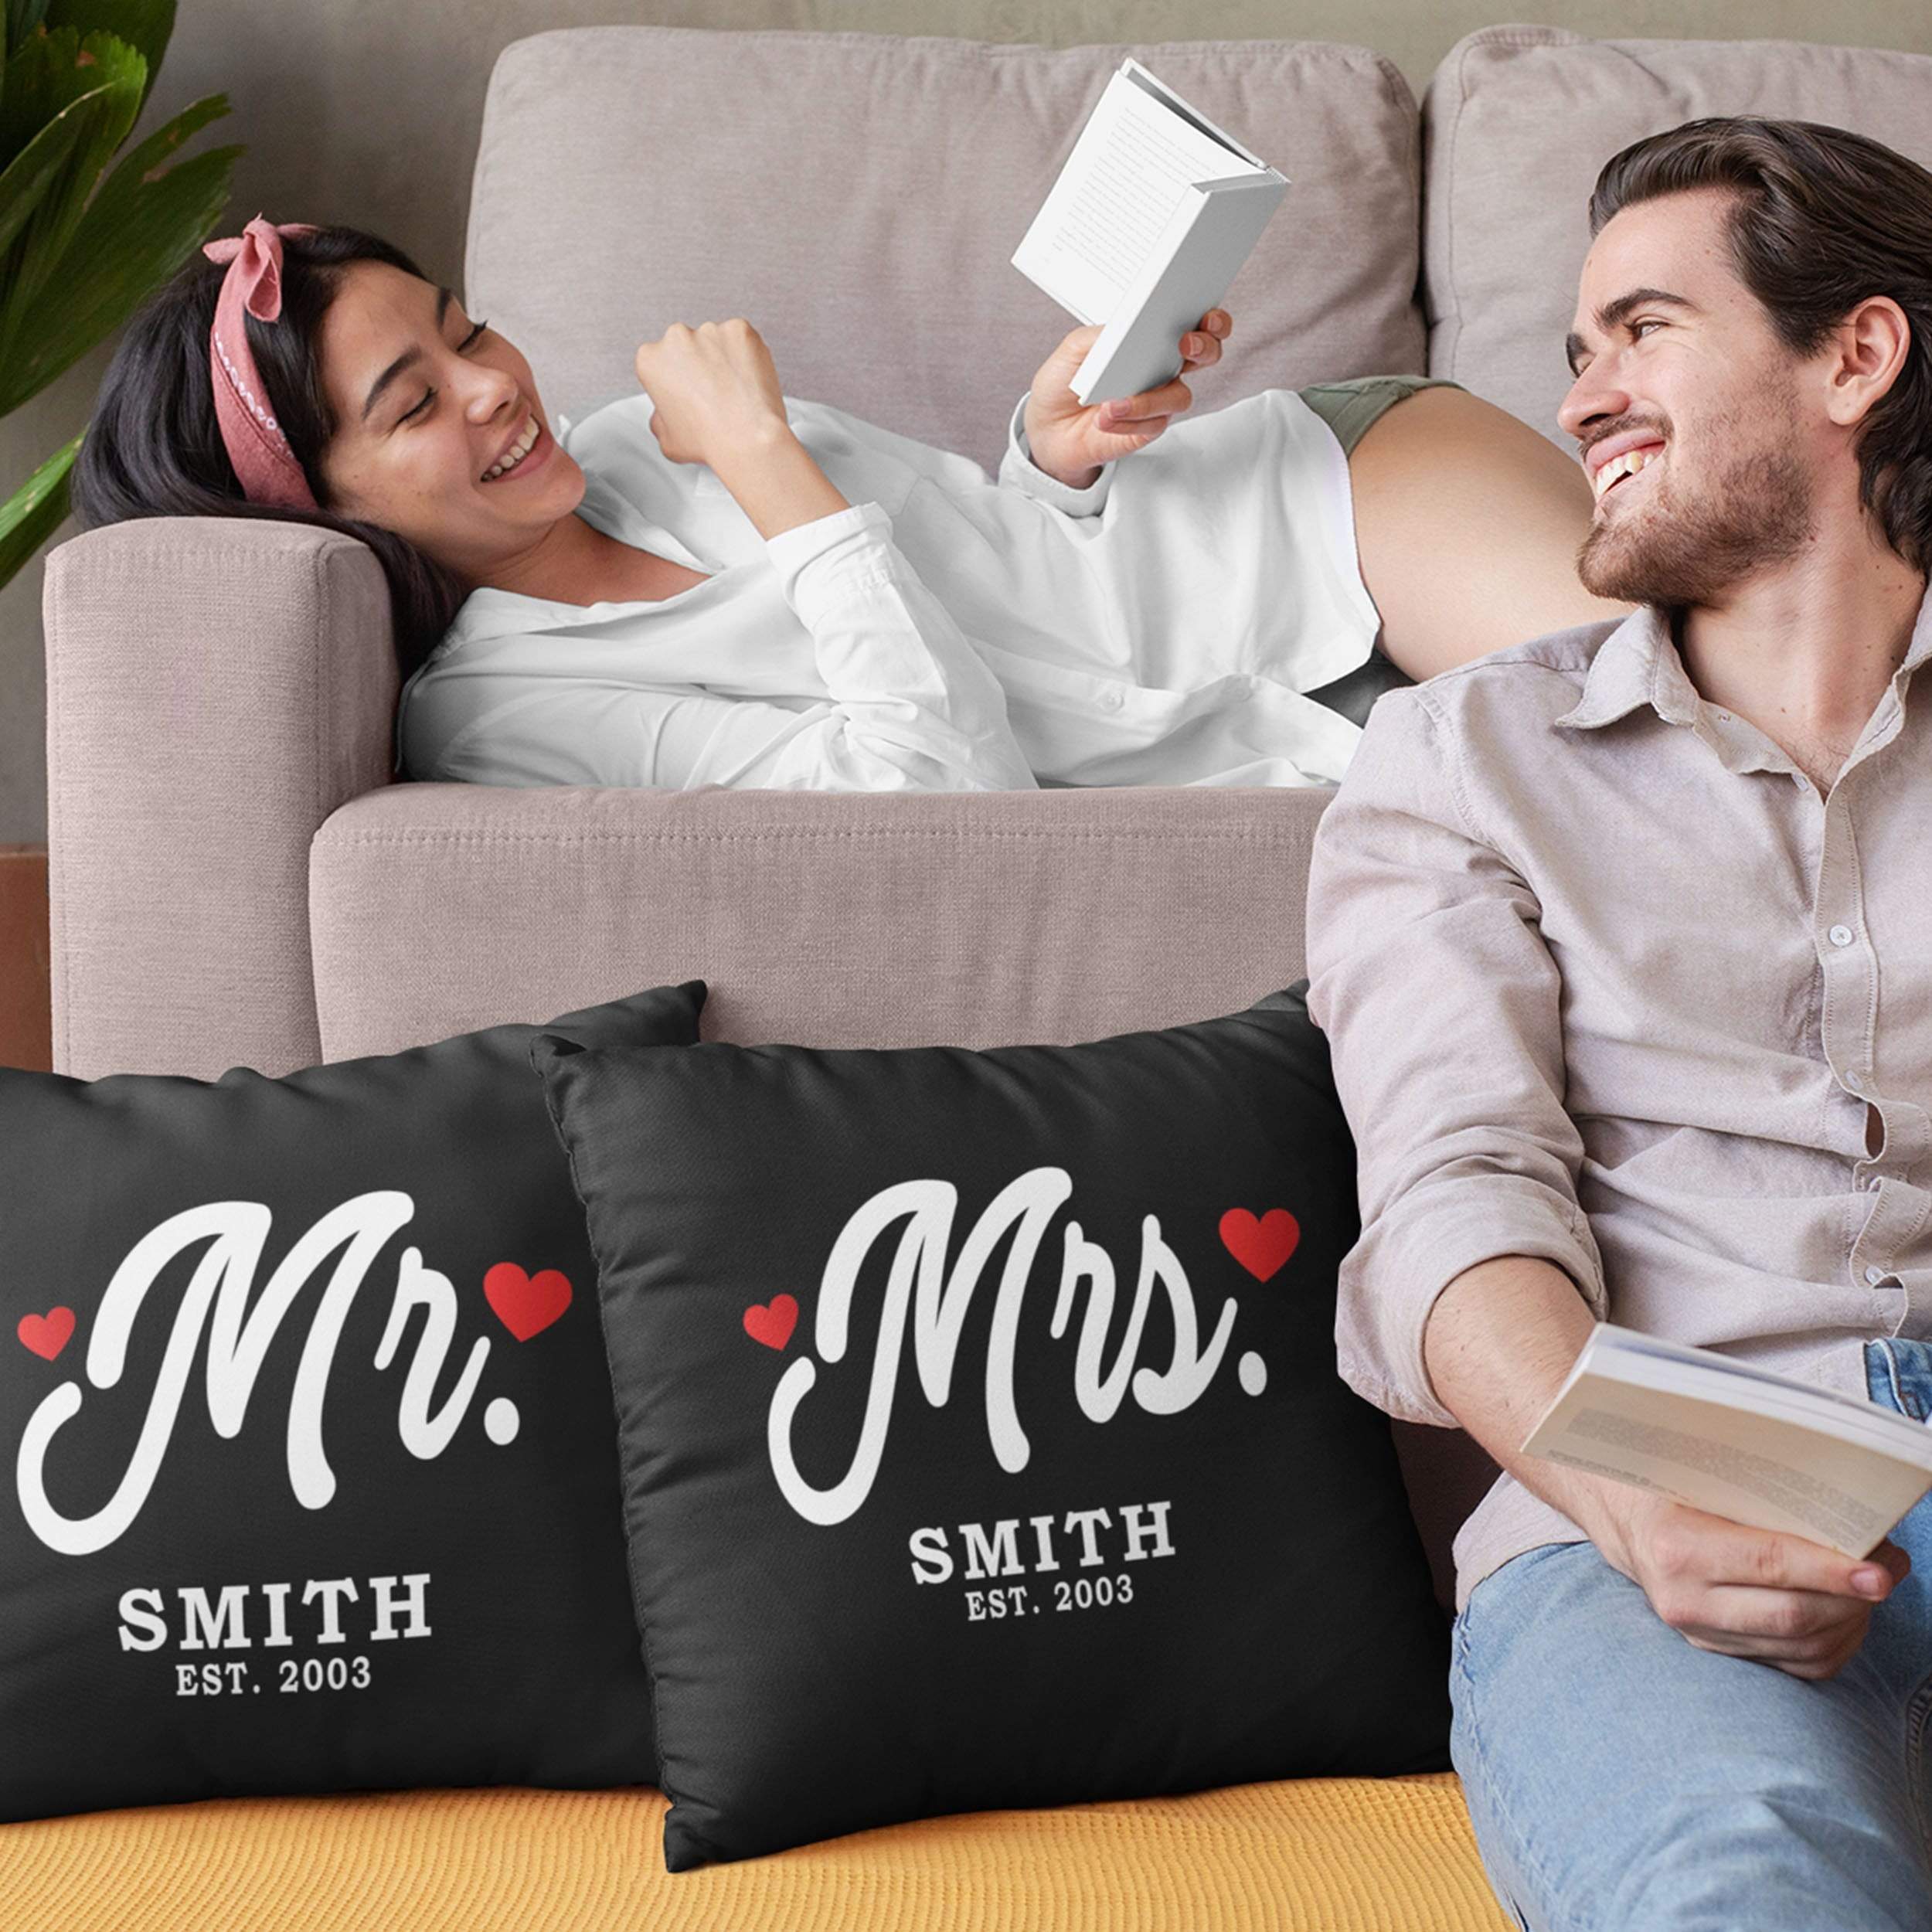 Couple's Name Pillow, Our First Date Pillow, Personalized Pillow